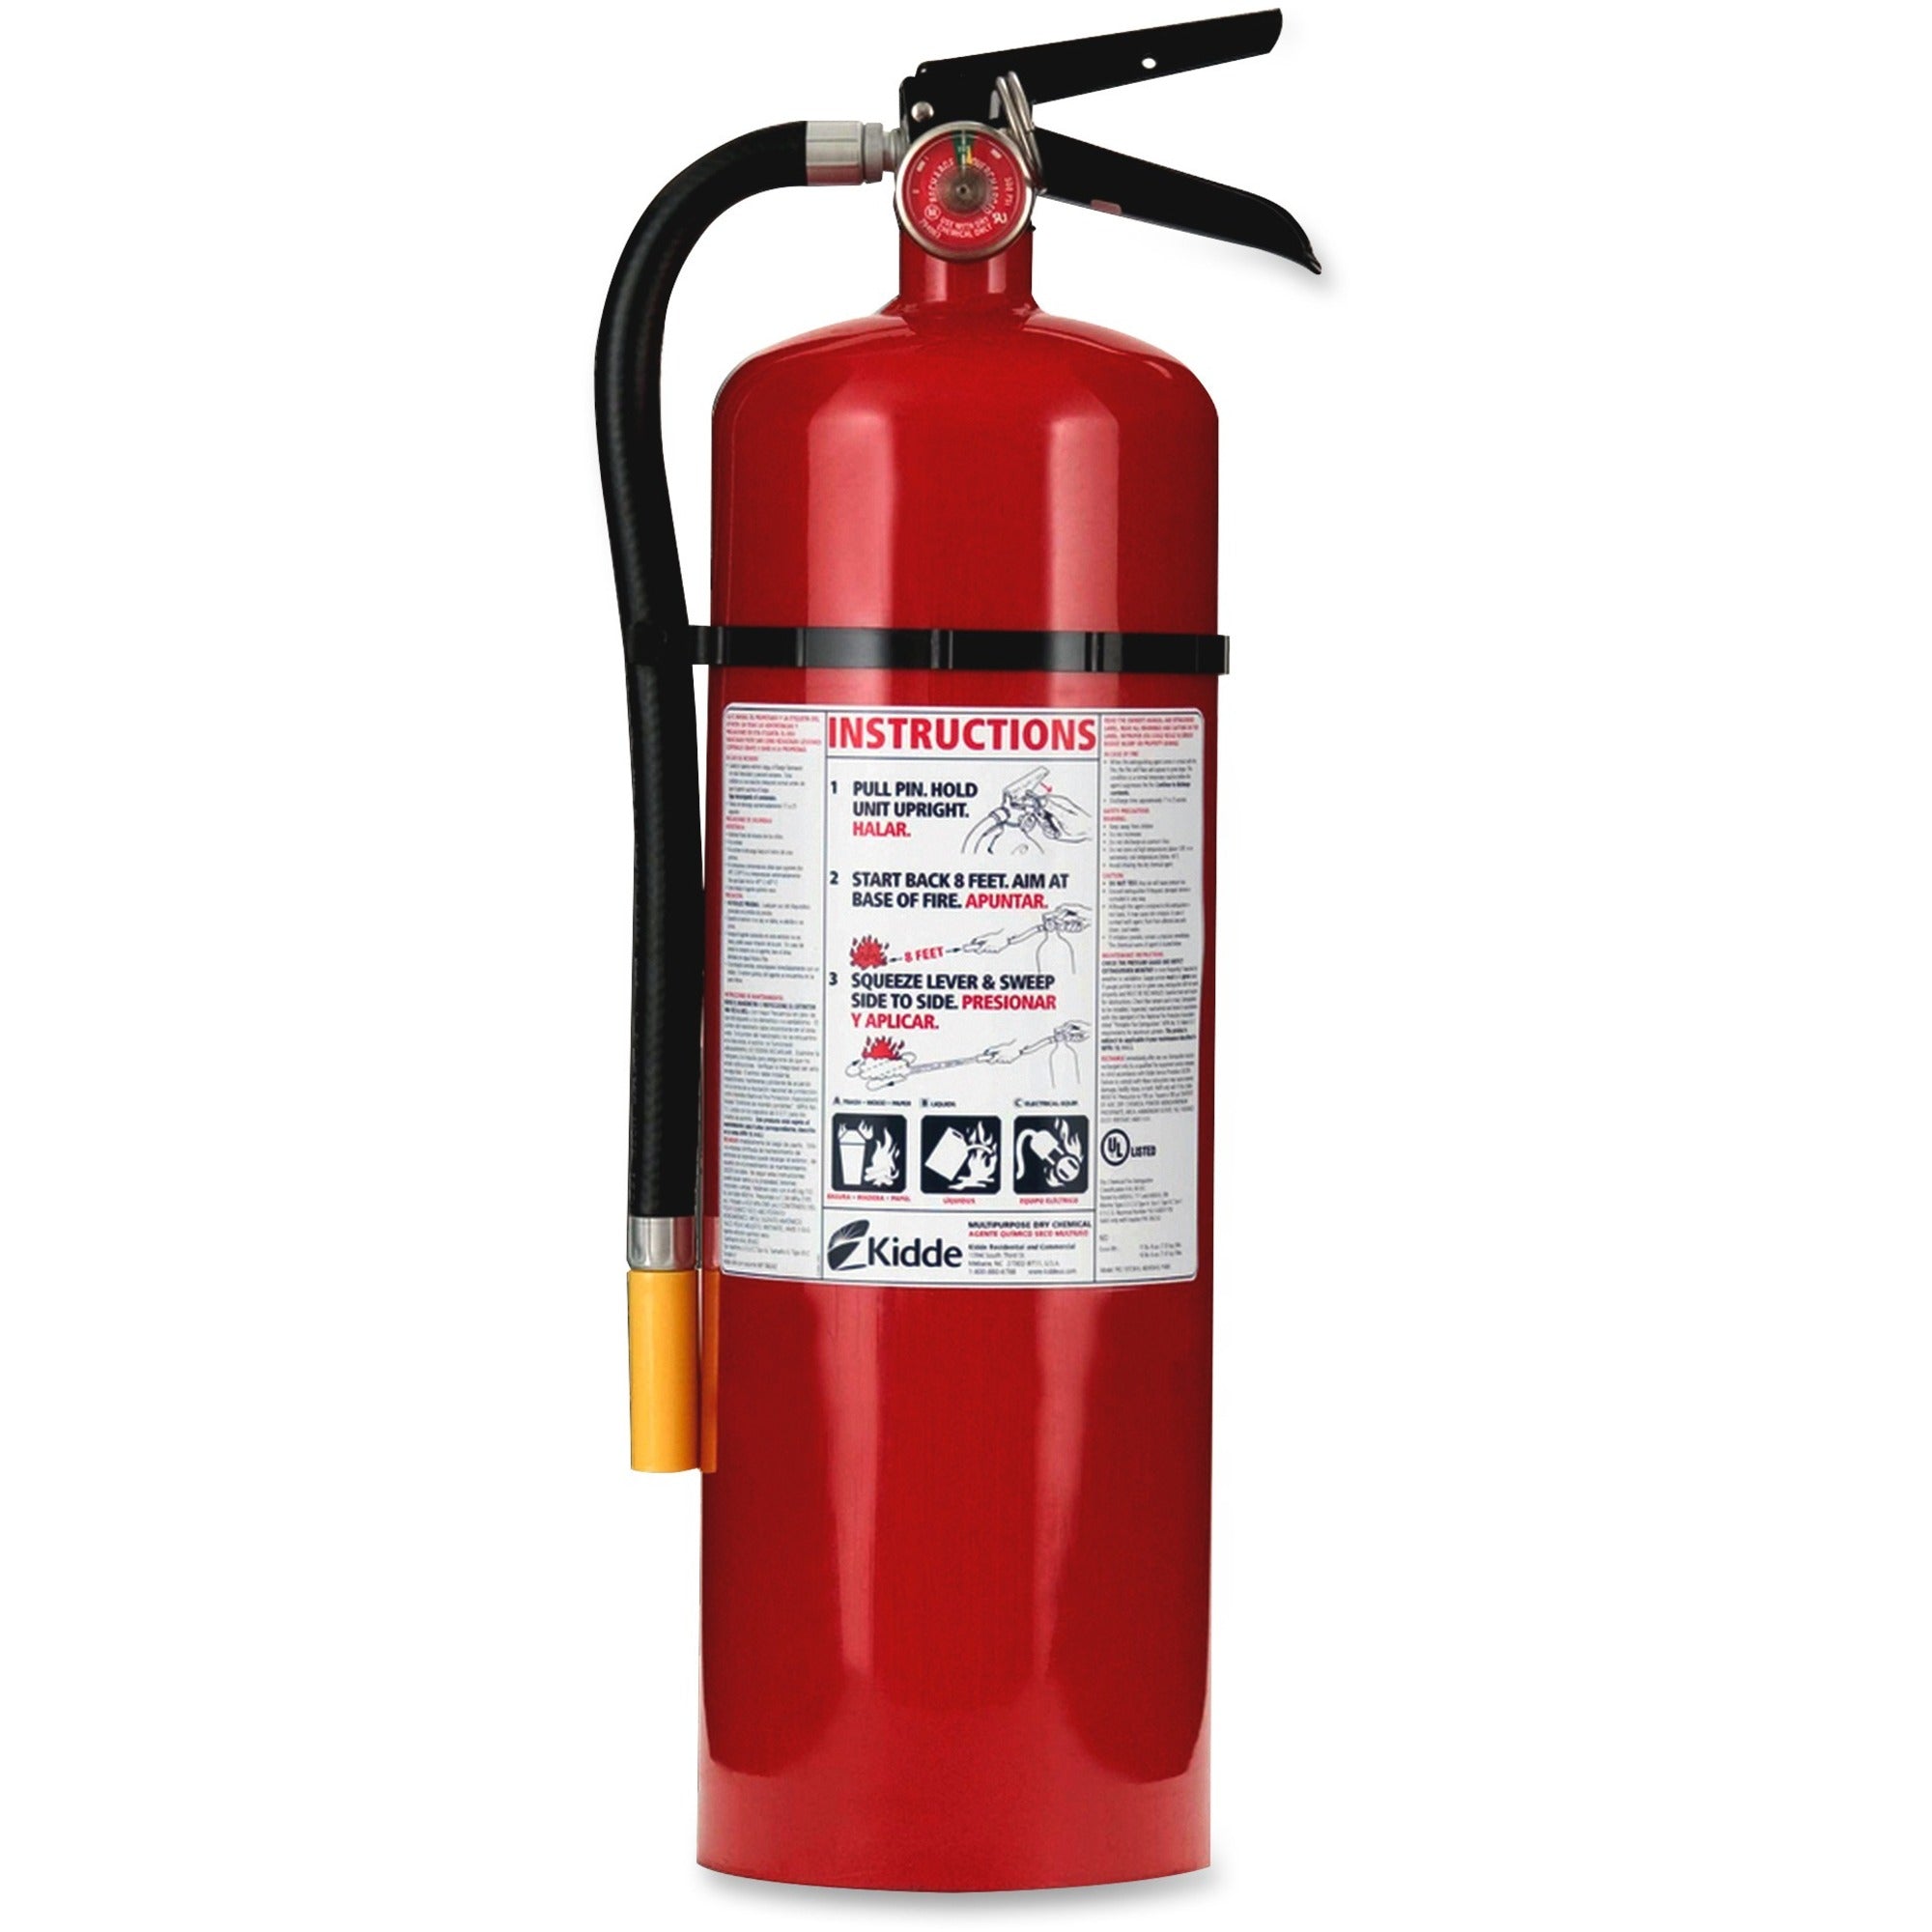 Kidde Pro 10 Fire Extinguisher - 10 lb Capacity - Rechargeable, Impact Resistant - Red - 